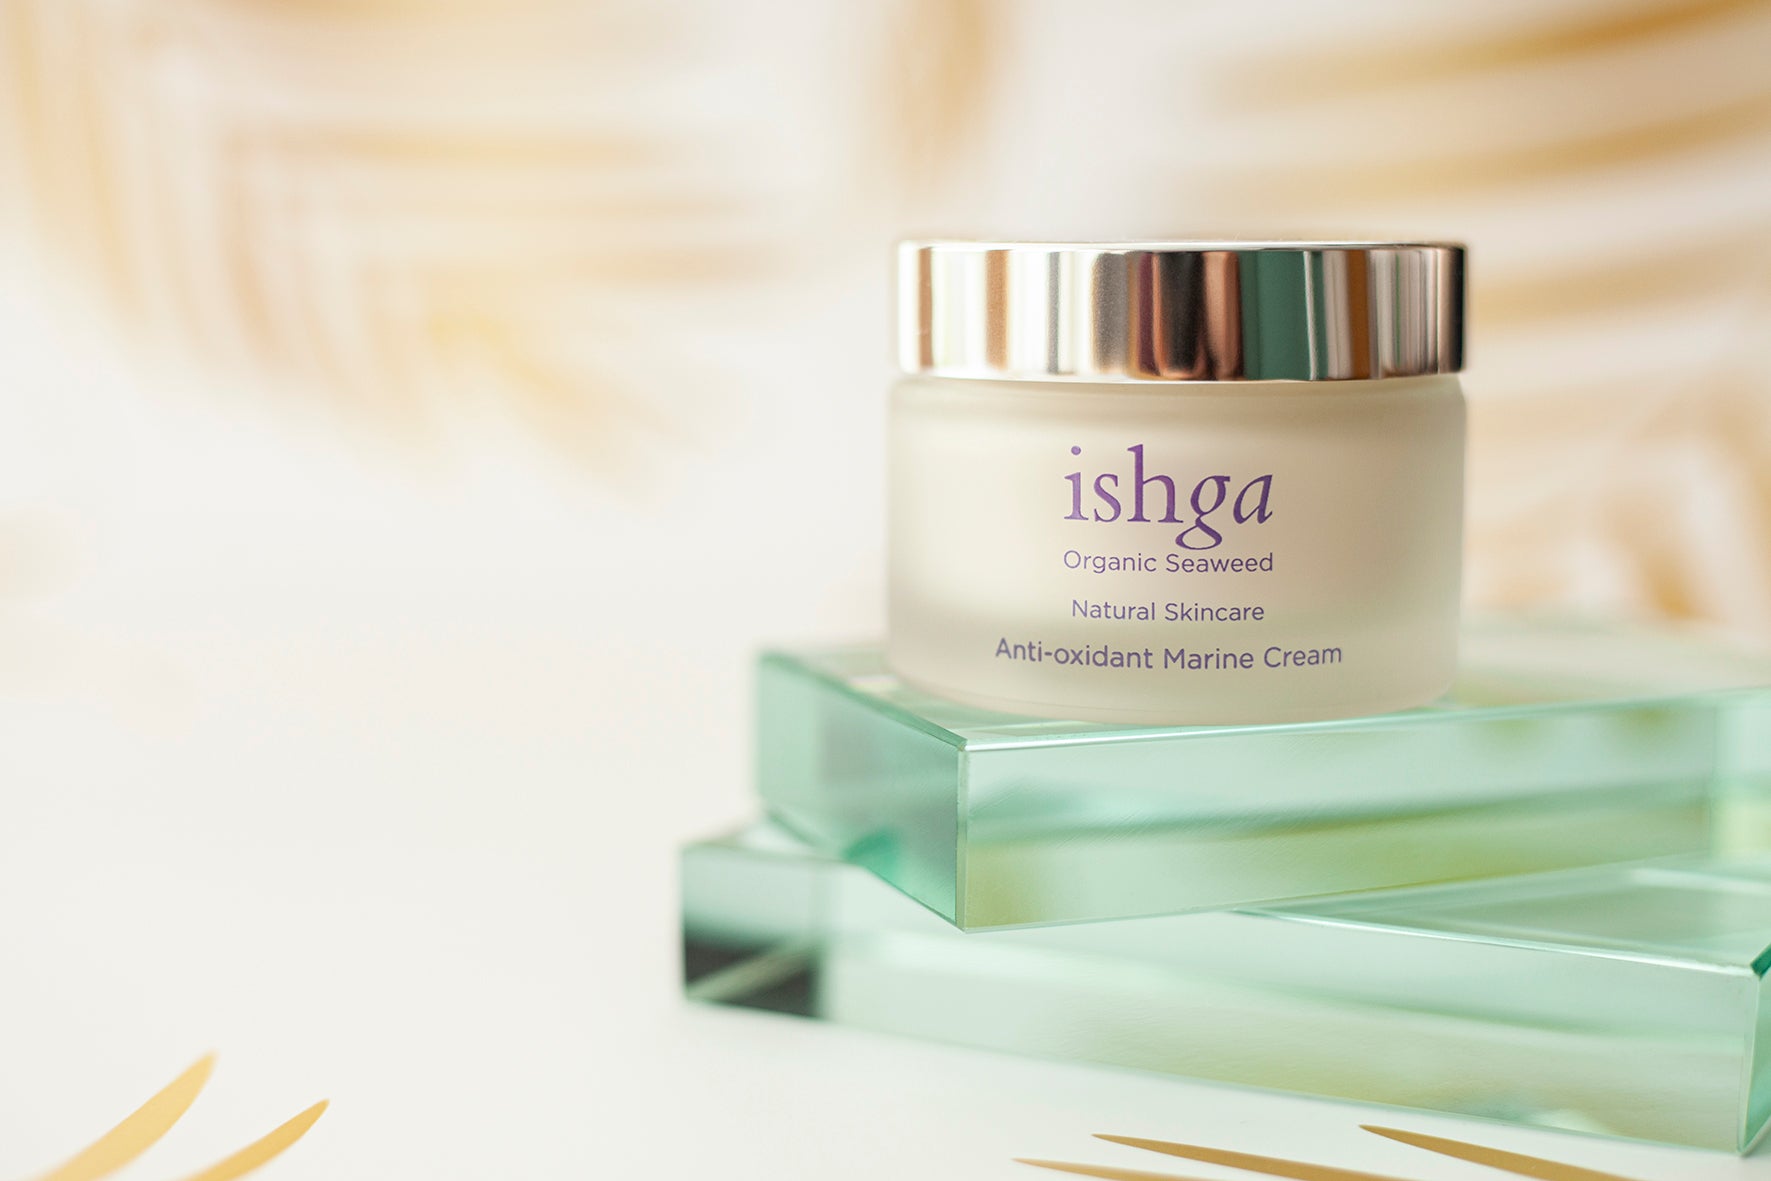 The ishga Collection